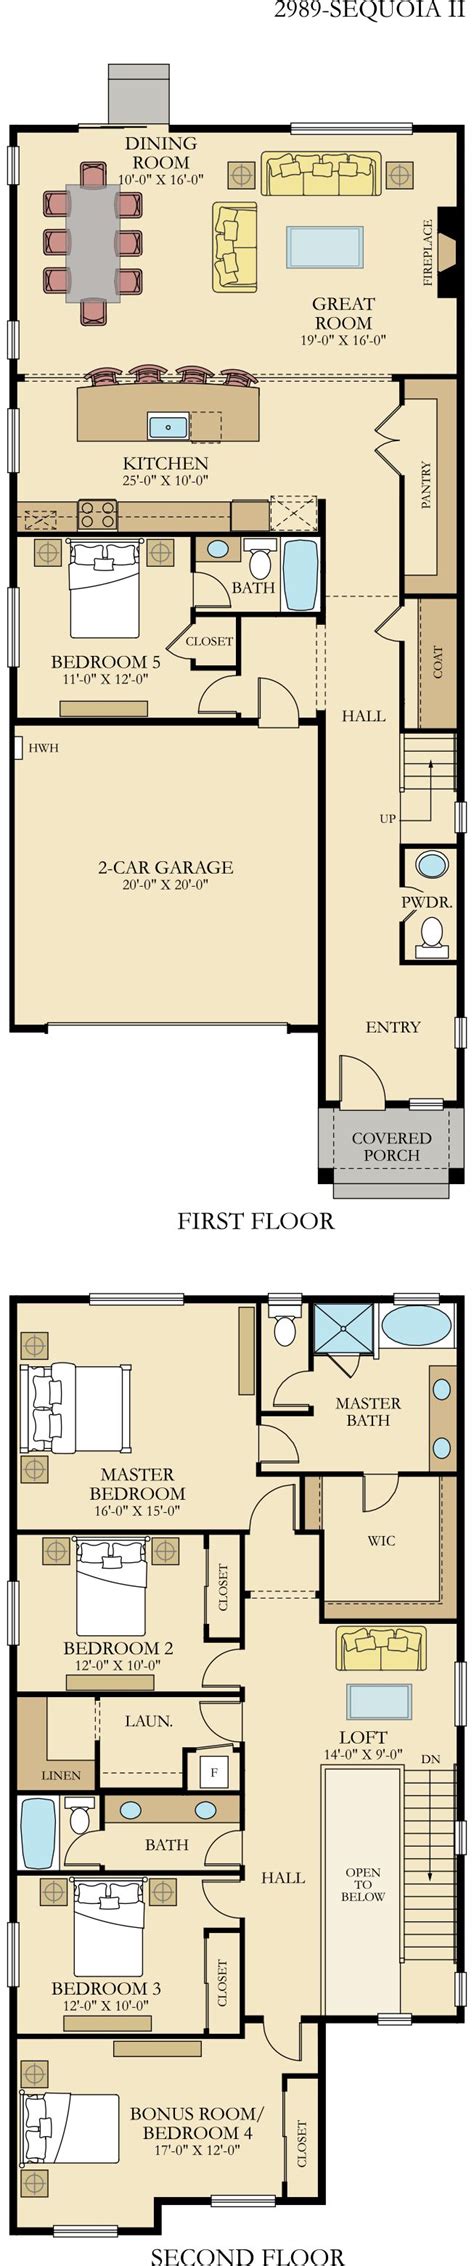 The Sequoia At Ten Trails Garage Entry Floor Plans House Plans